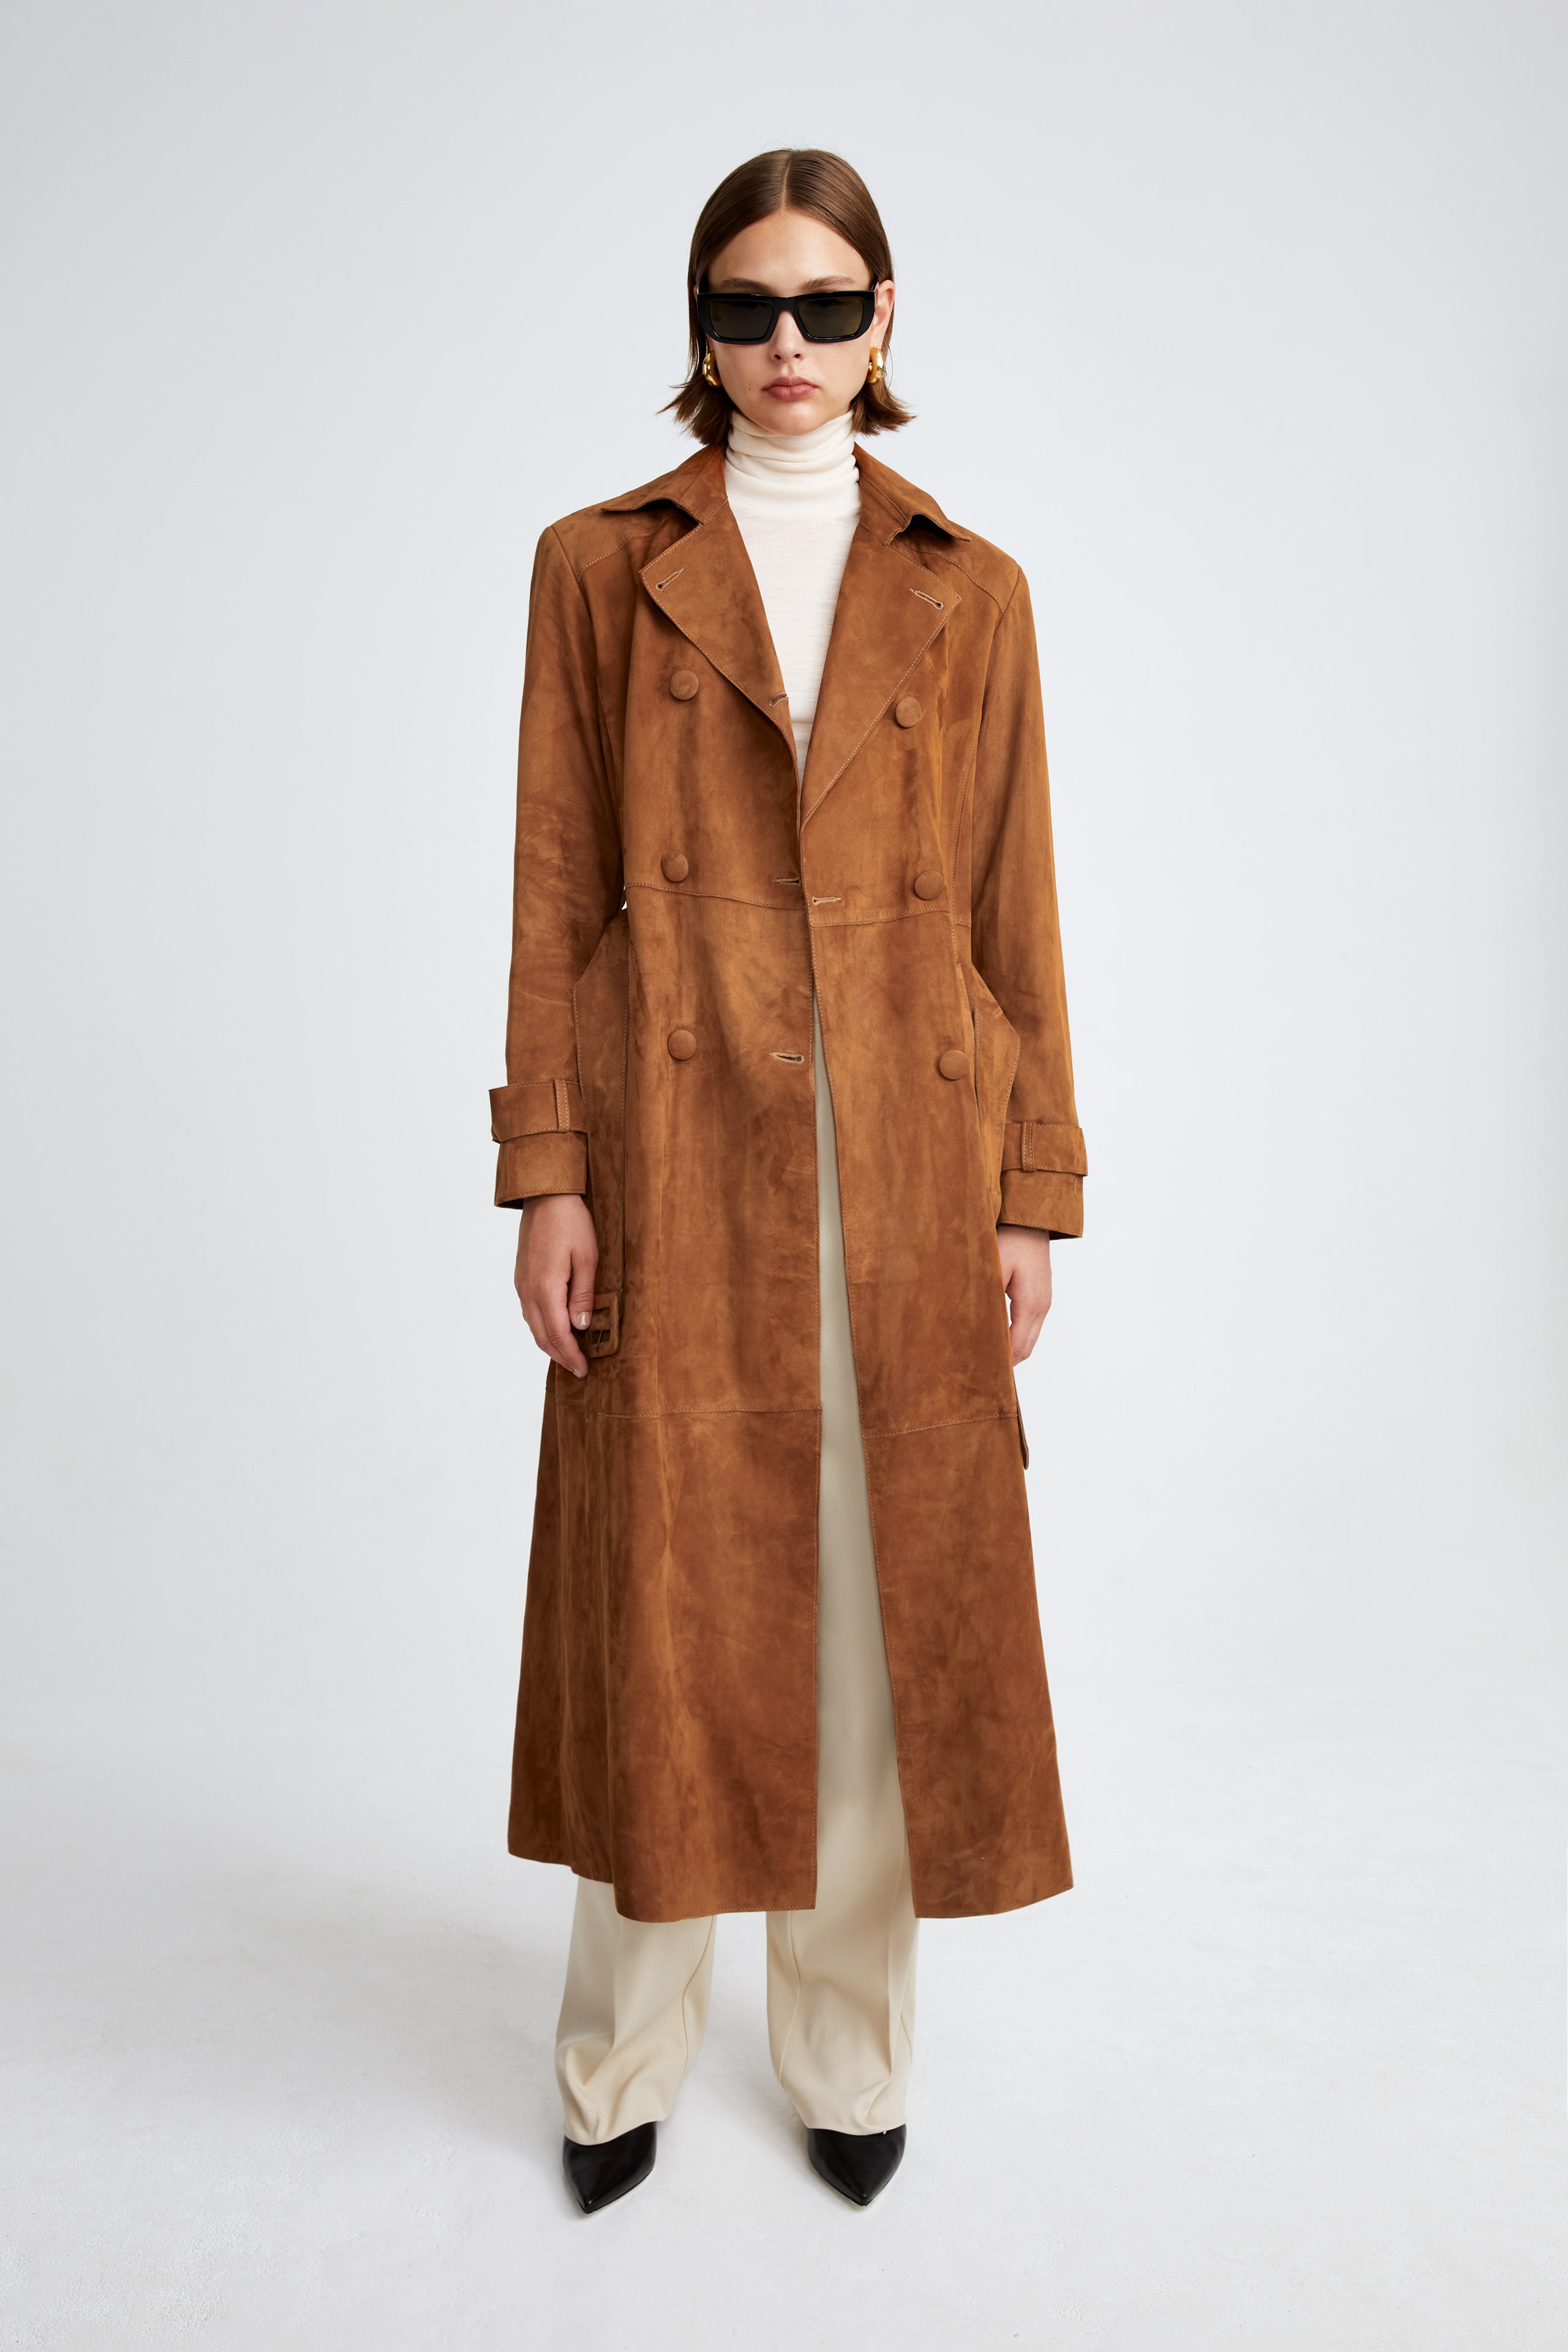 Model is wearing the Tate Caramel Everyday Suede Trench Coat Front